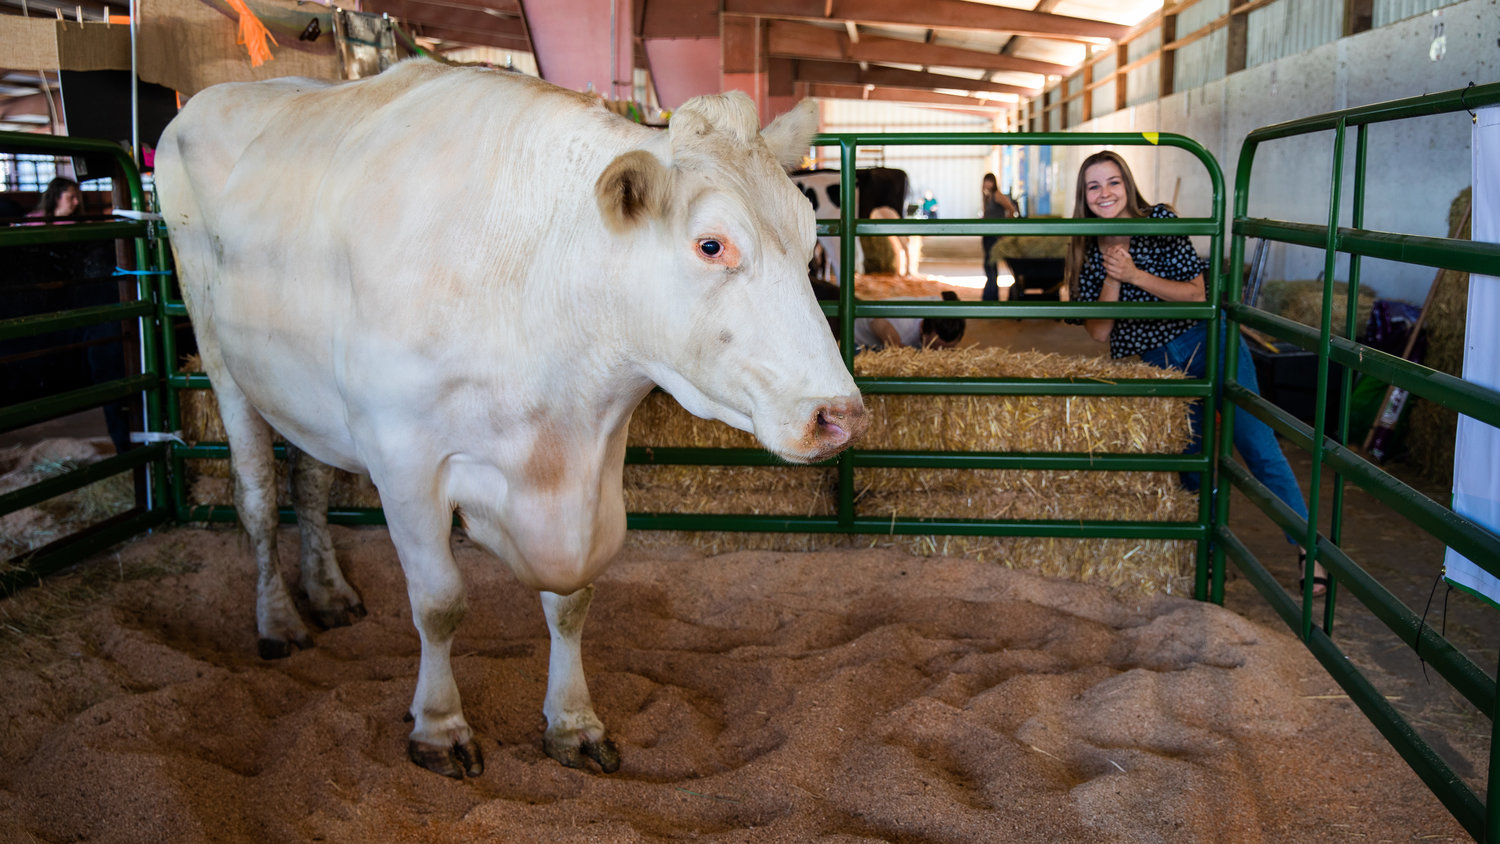 Ryder, a Milking Shorthorn Steer, looks on from a pen during his first visit to the Southwest Washington Fairgrounds.